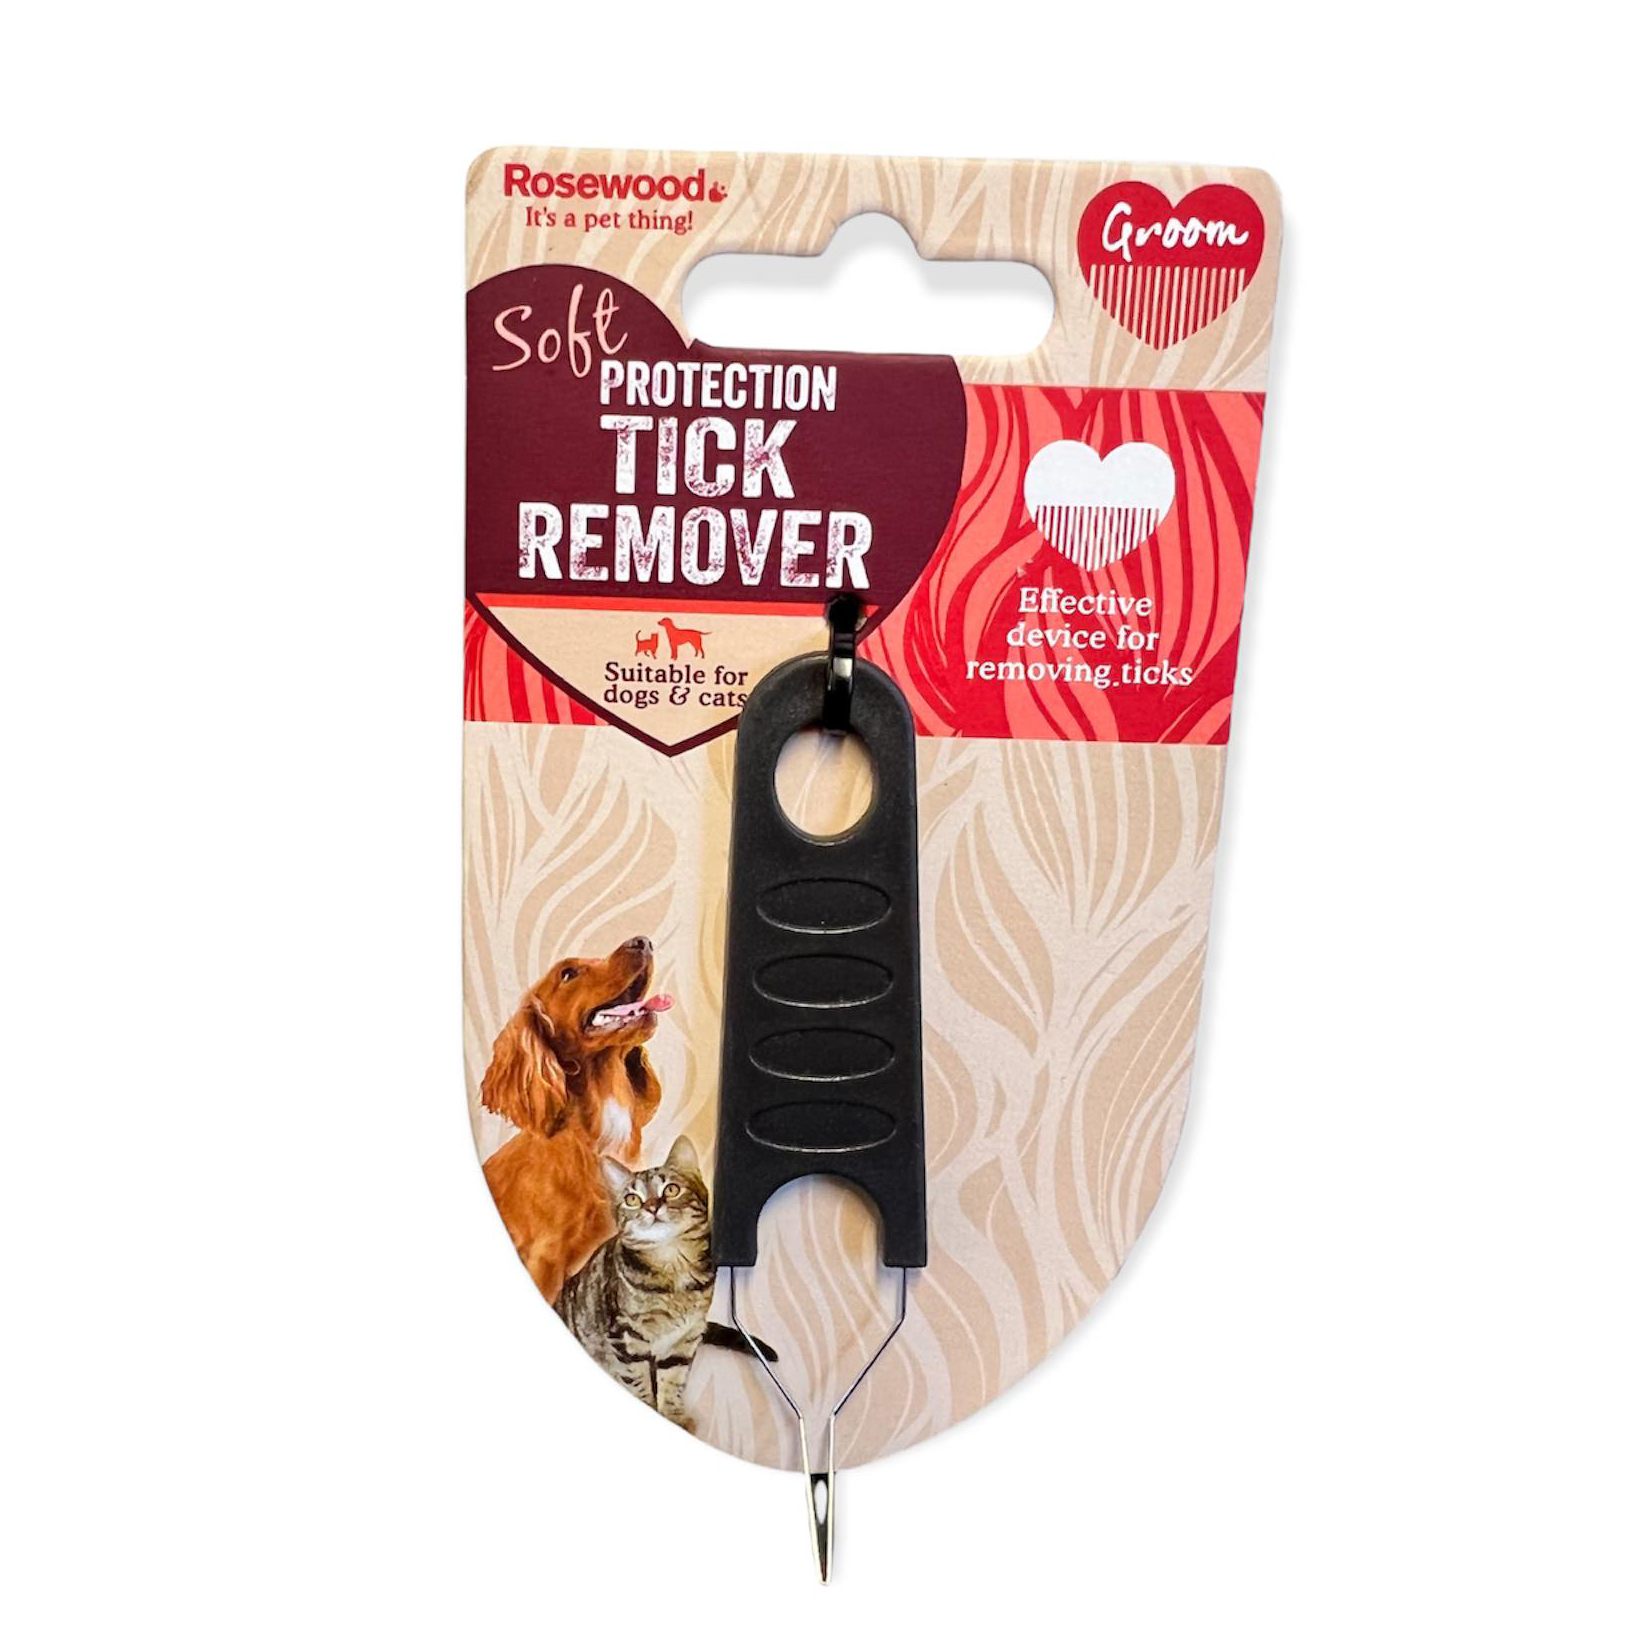 Rosewood Tick Remover